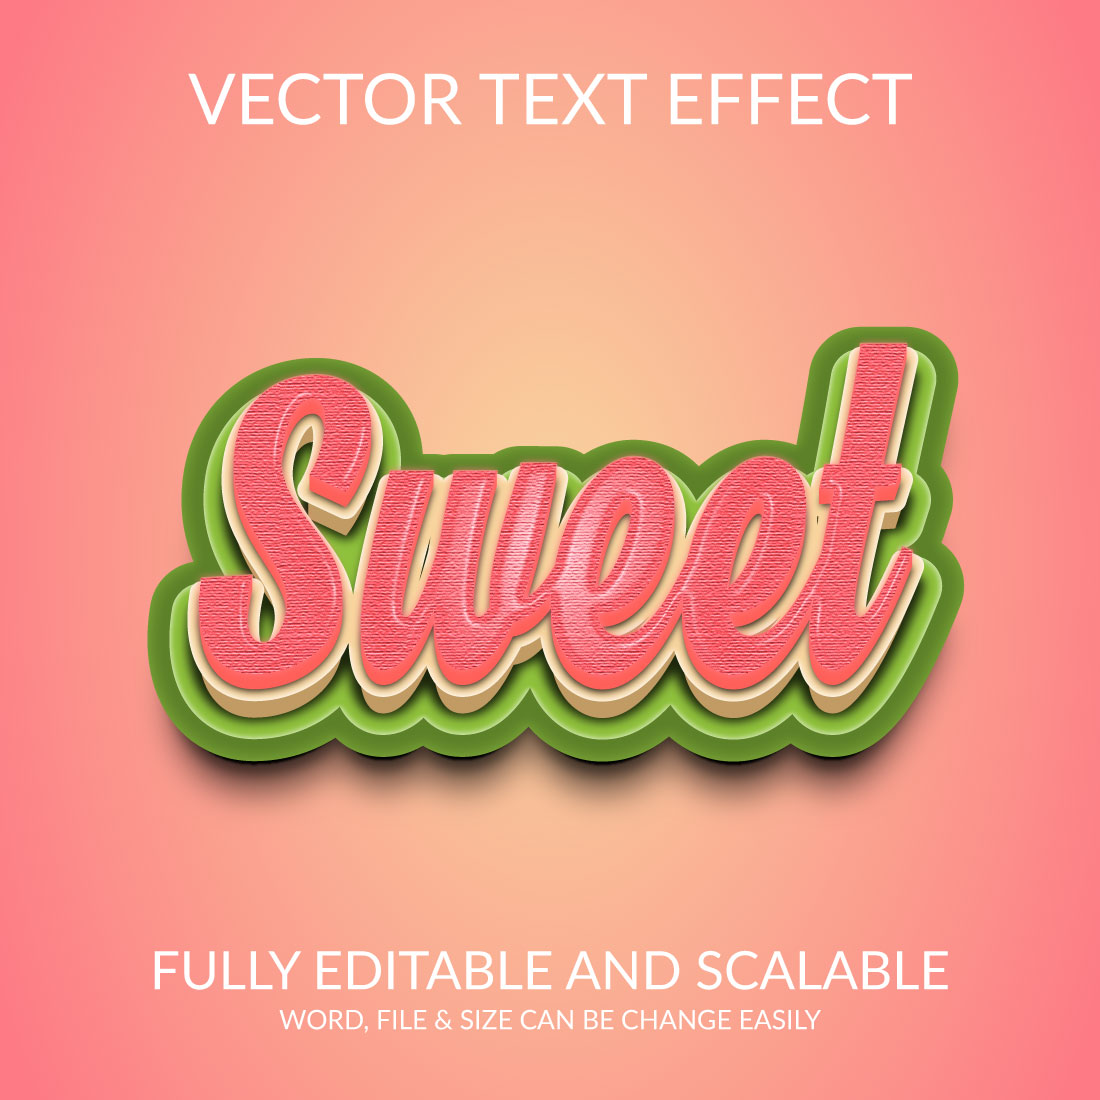 Sweet 3d Text Effect Template cover image.